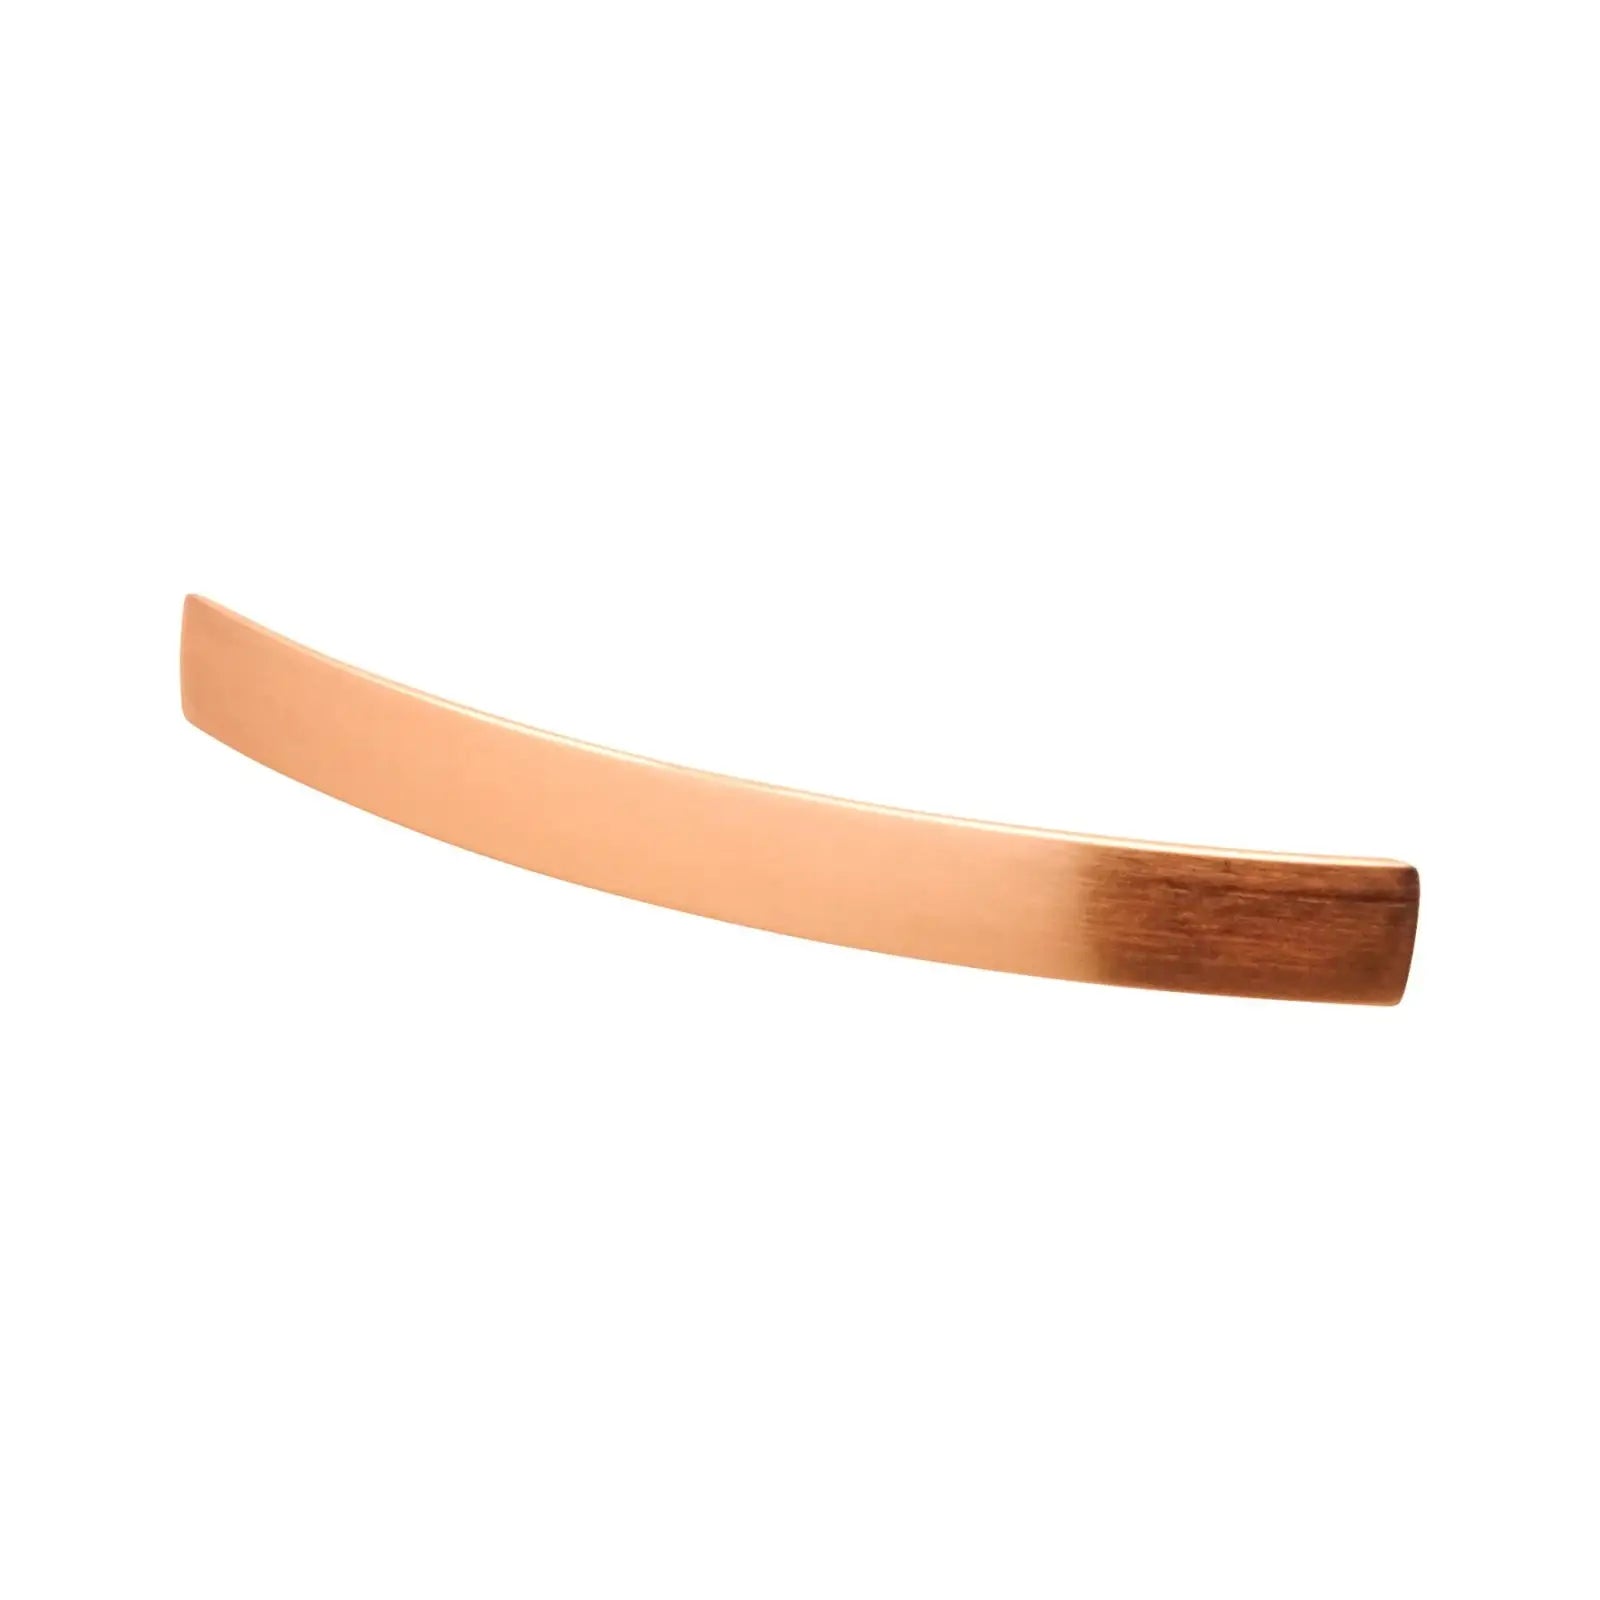 Loch - Curved Bow Kitchen Handle - Satin Copper - Decor And Decor